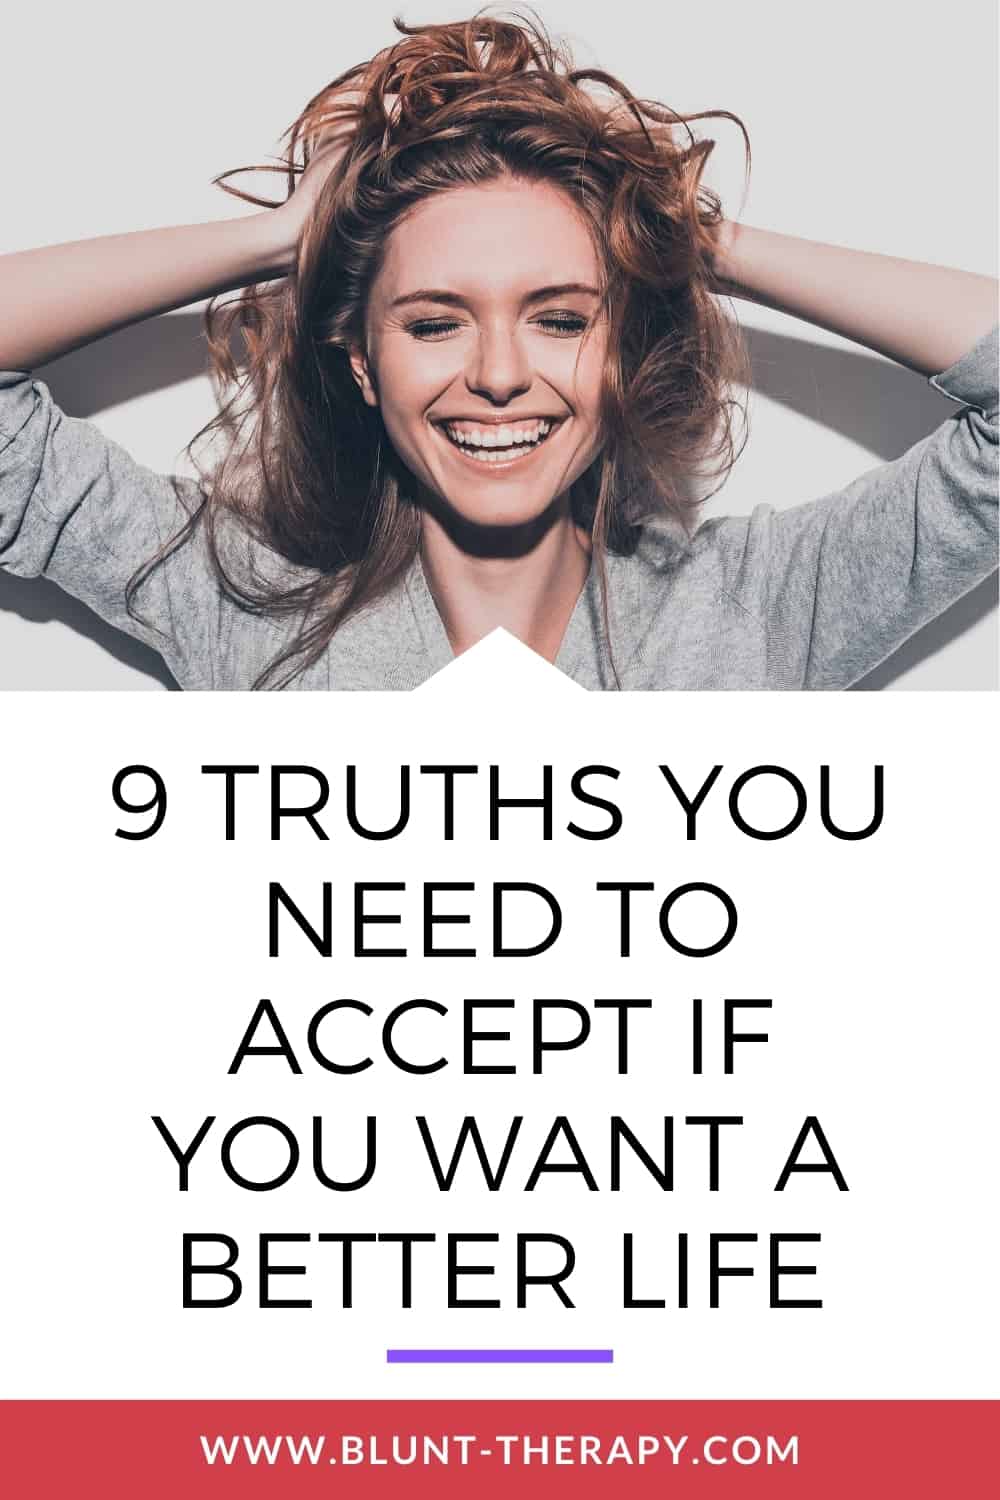 9 Truths You Need To Accept If You Want To Live A Better Life